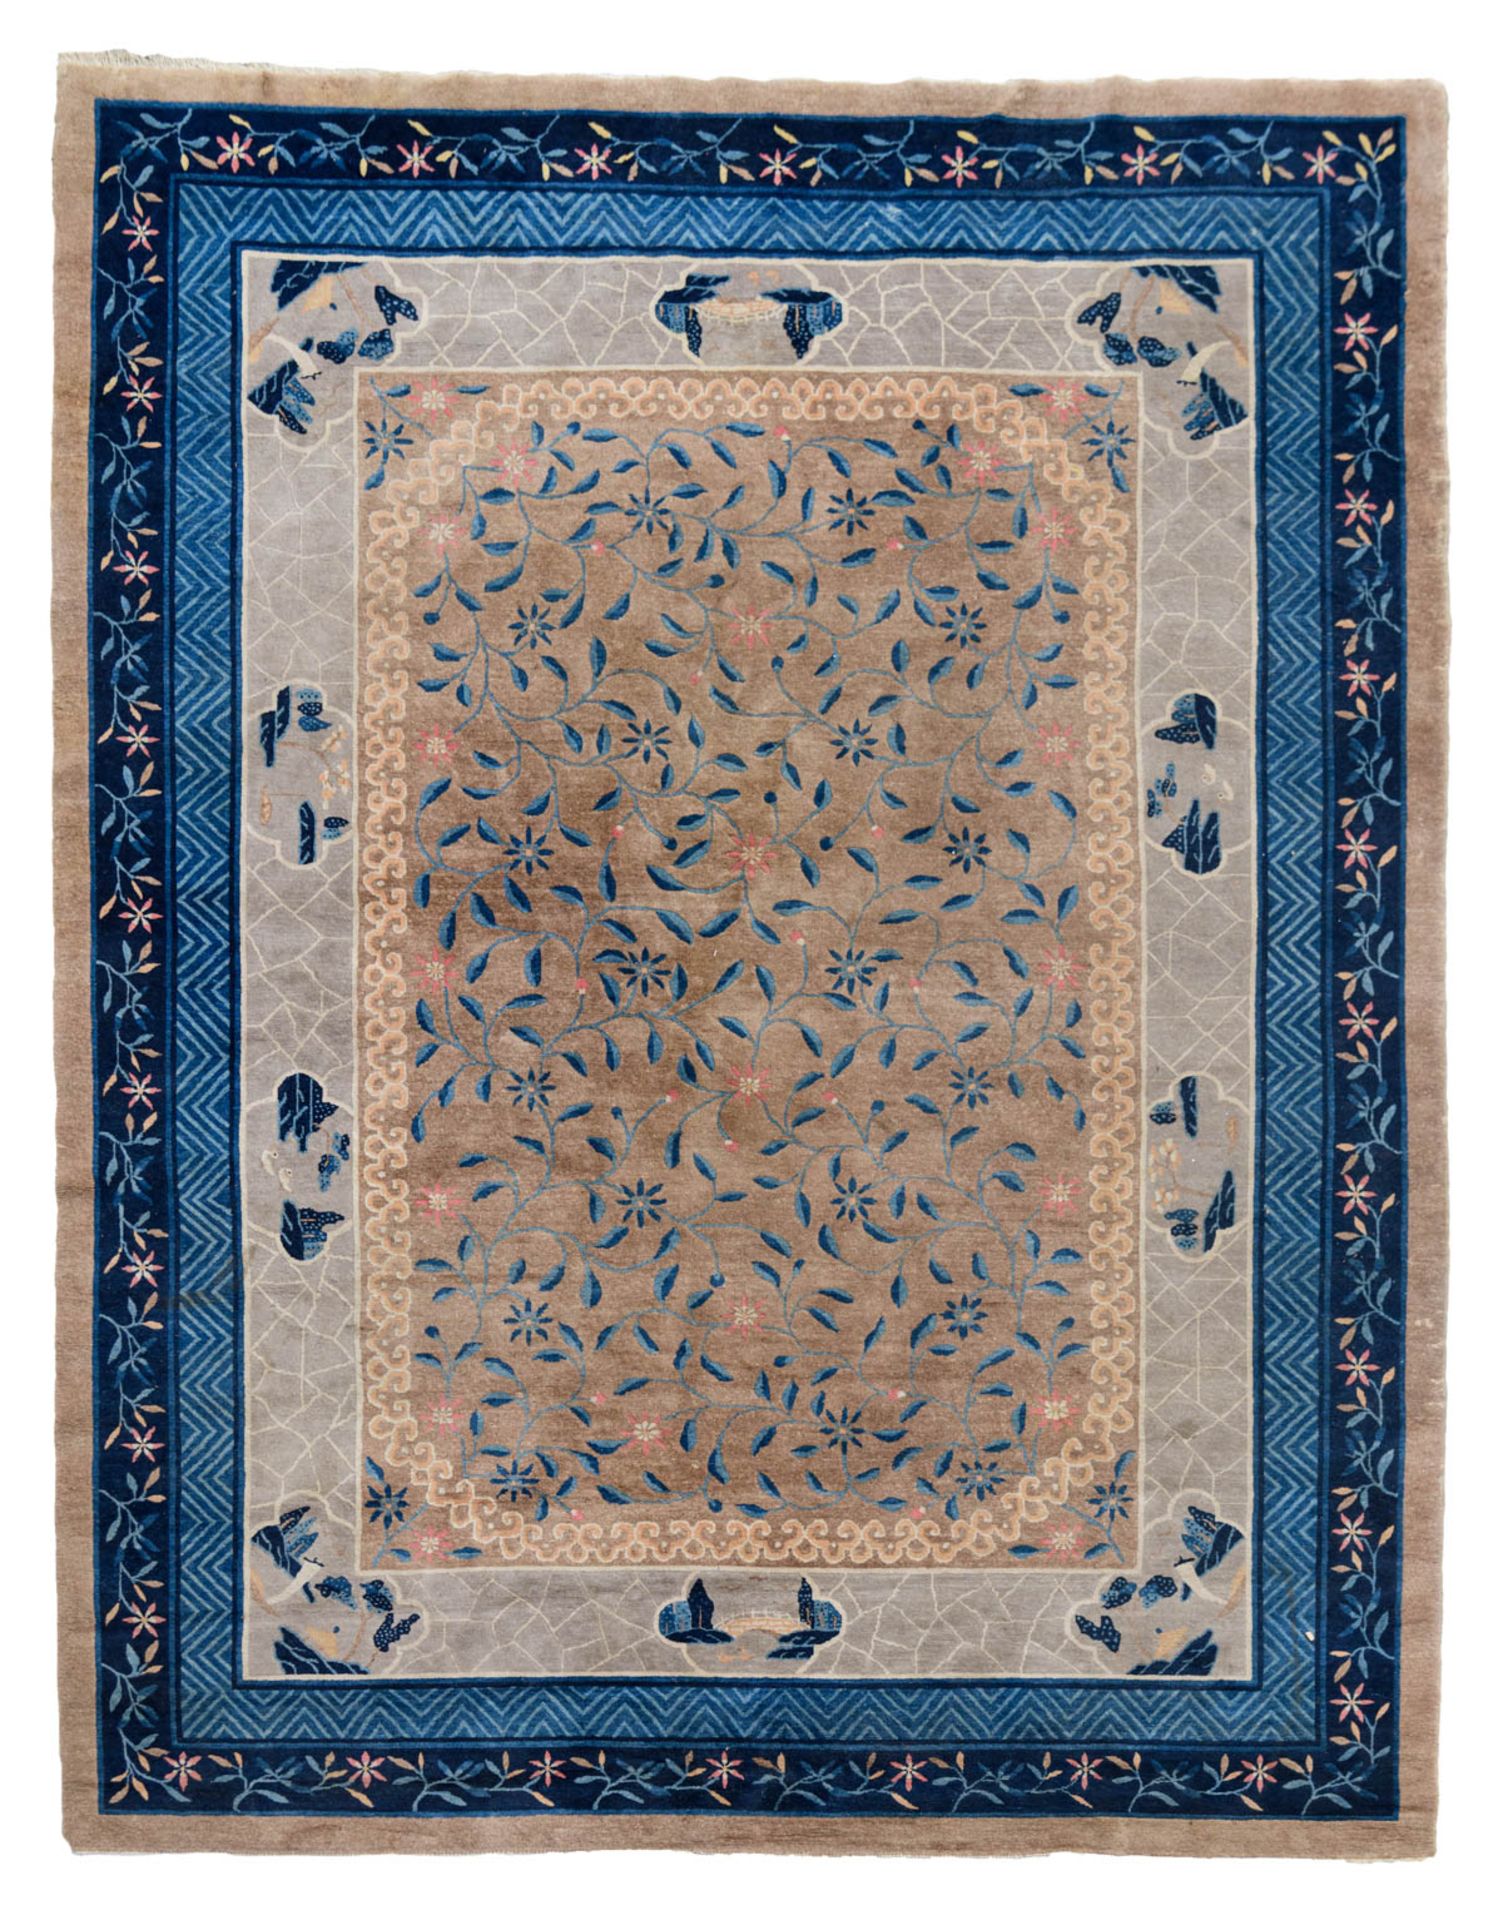 A Chinese rug decorated with stylized floral motifs